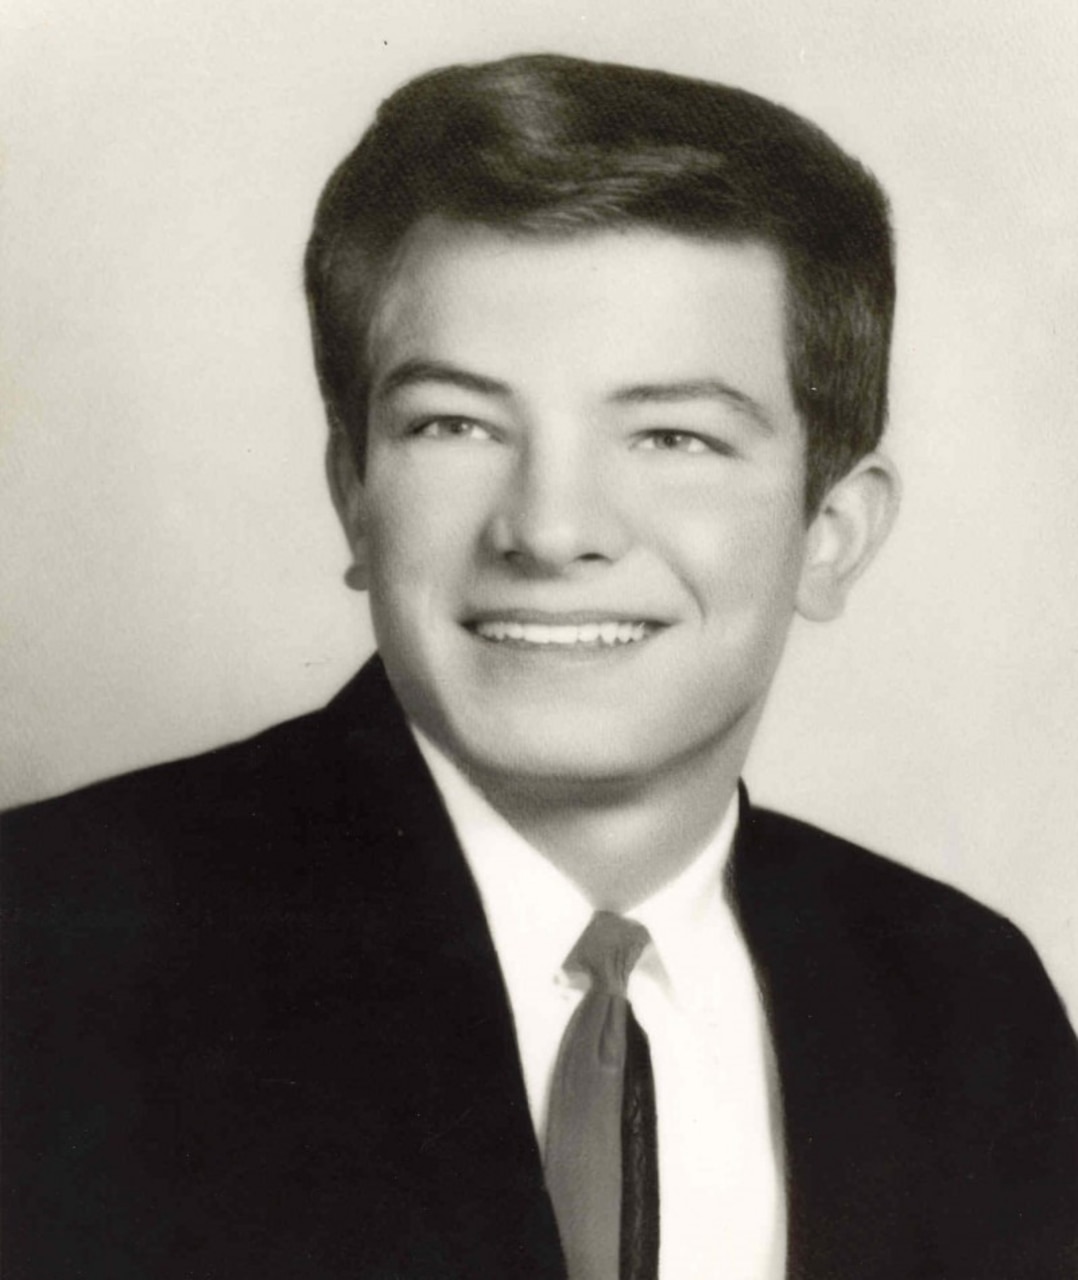 A young man wearing a suit and tie poses for a photo.